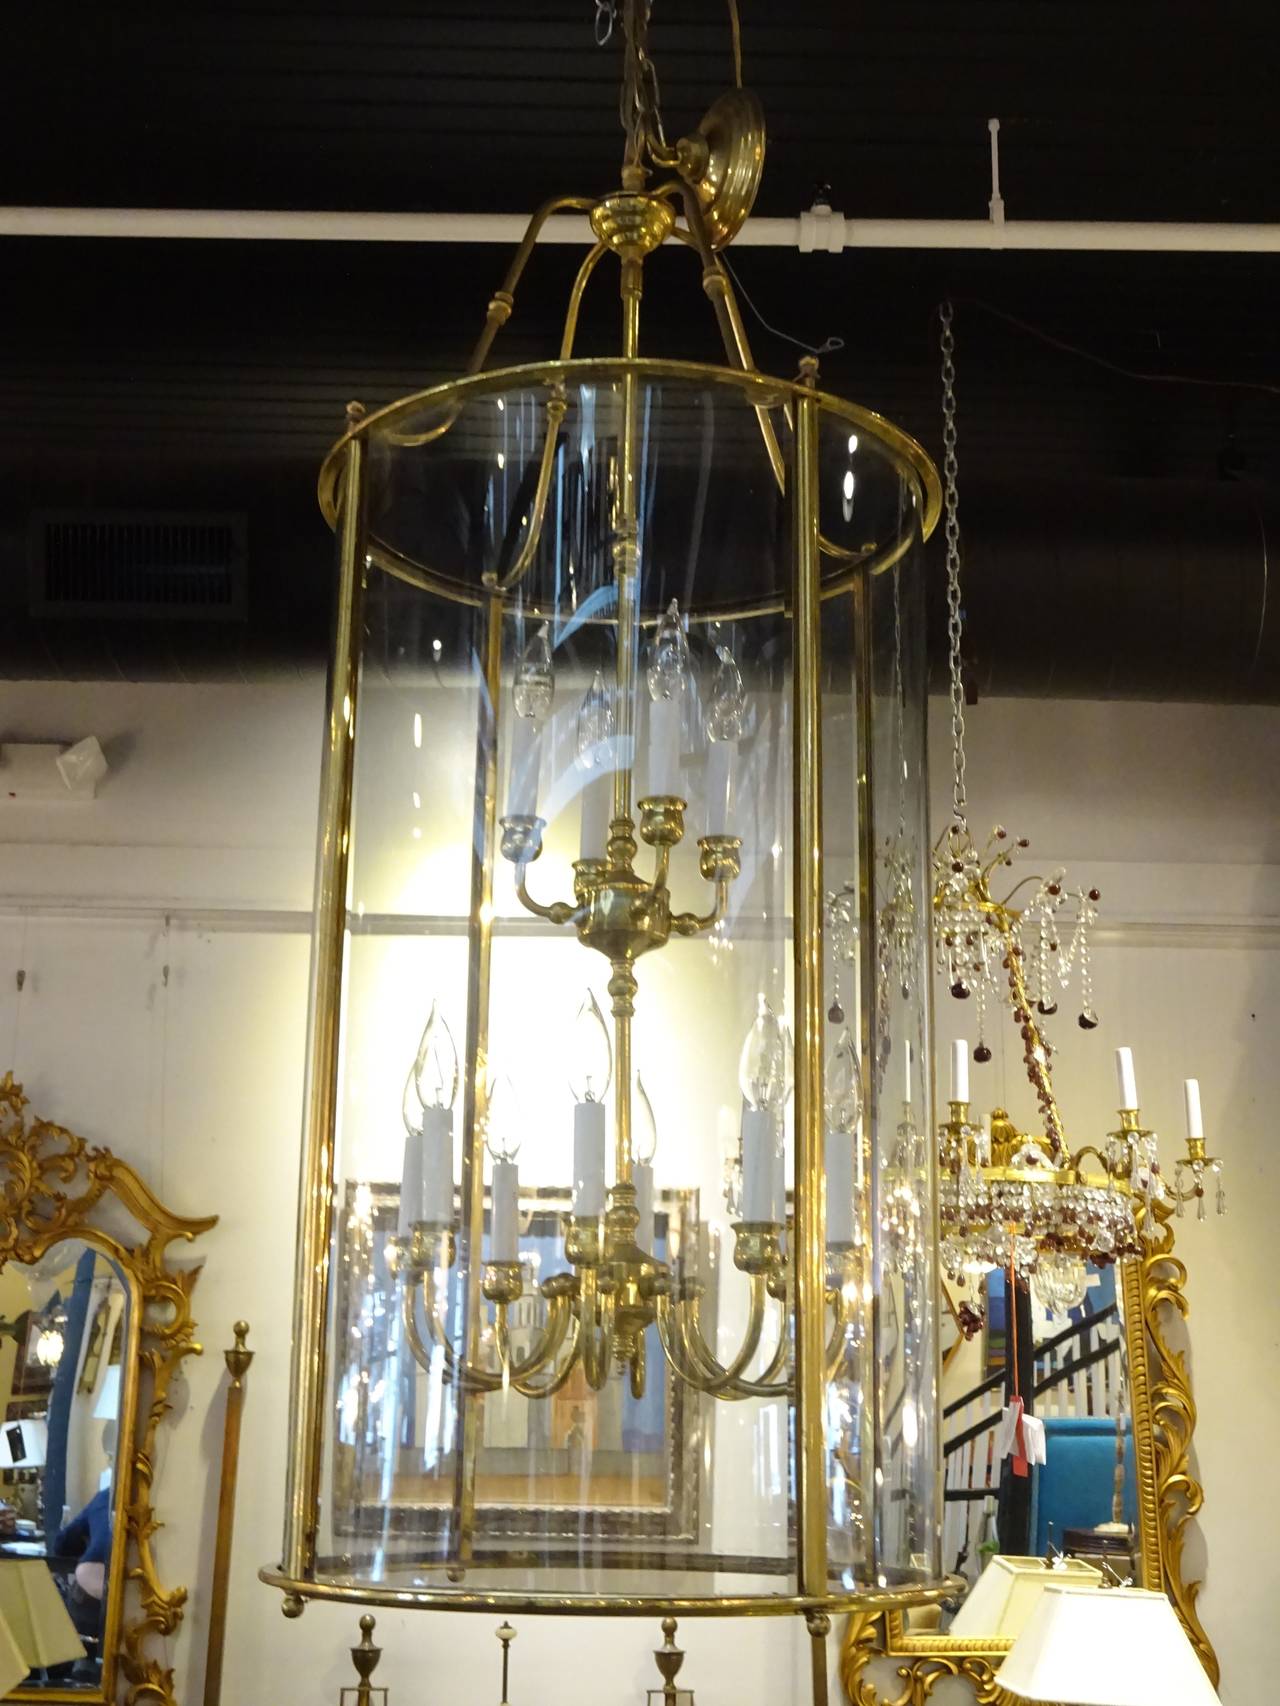 Large vintage brass double hanging lantern, of typical cylindrical form with two tiers of lighting, the top tier with four lights, the lower tier with eight lights, surrounded by four large curved glass paneles.